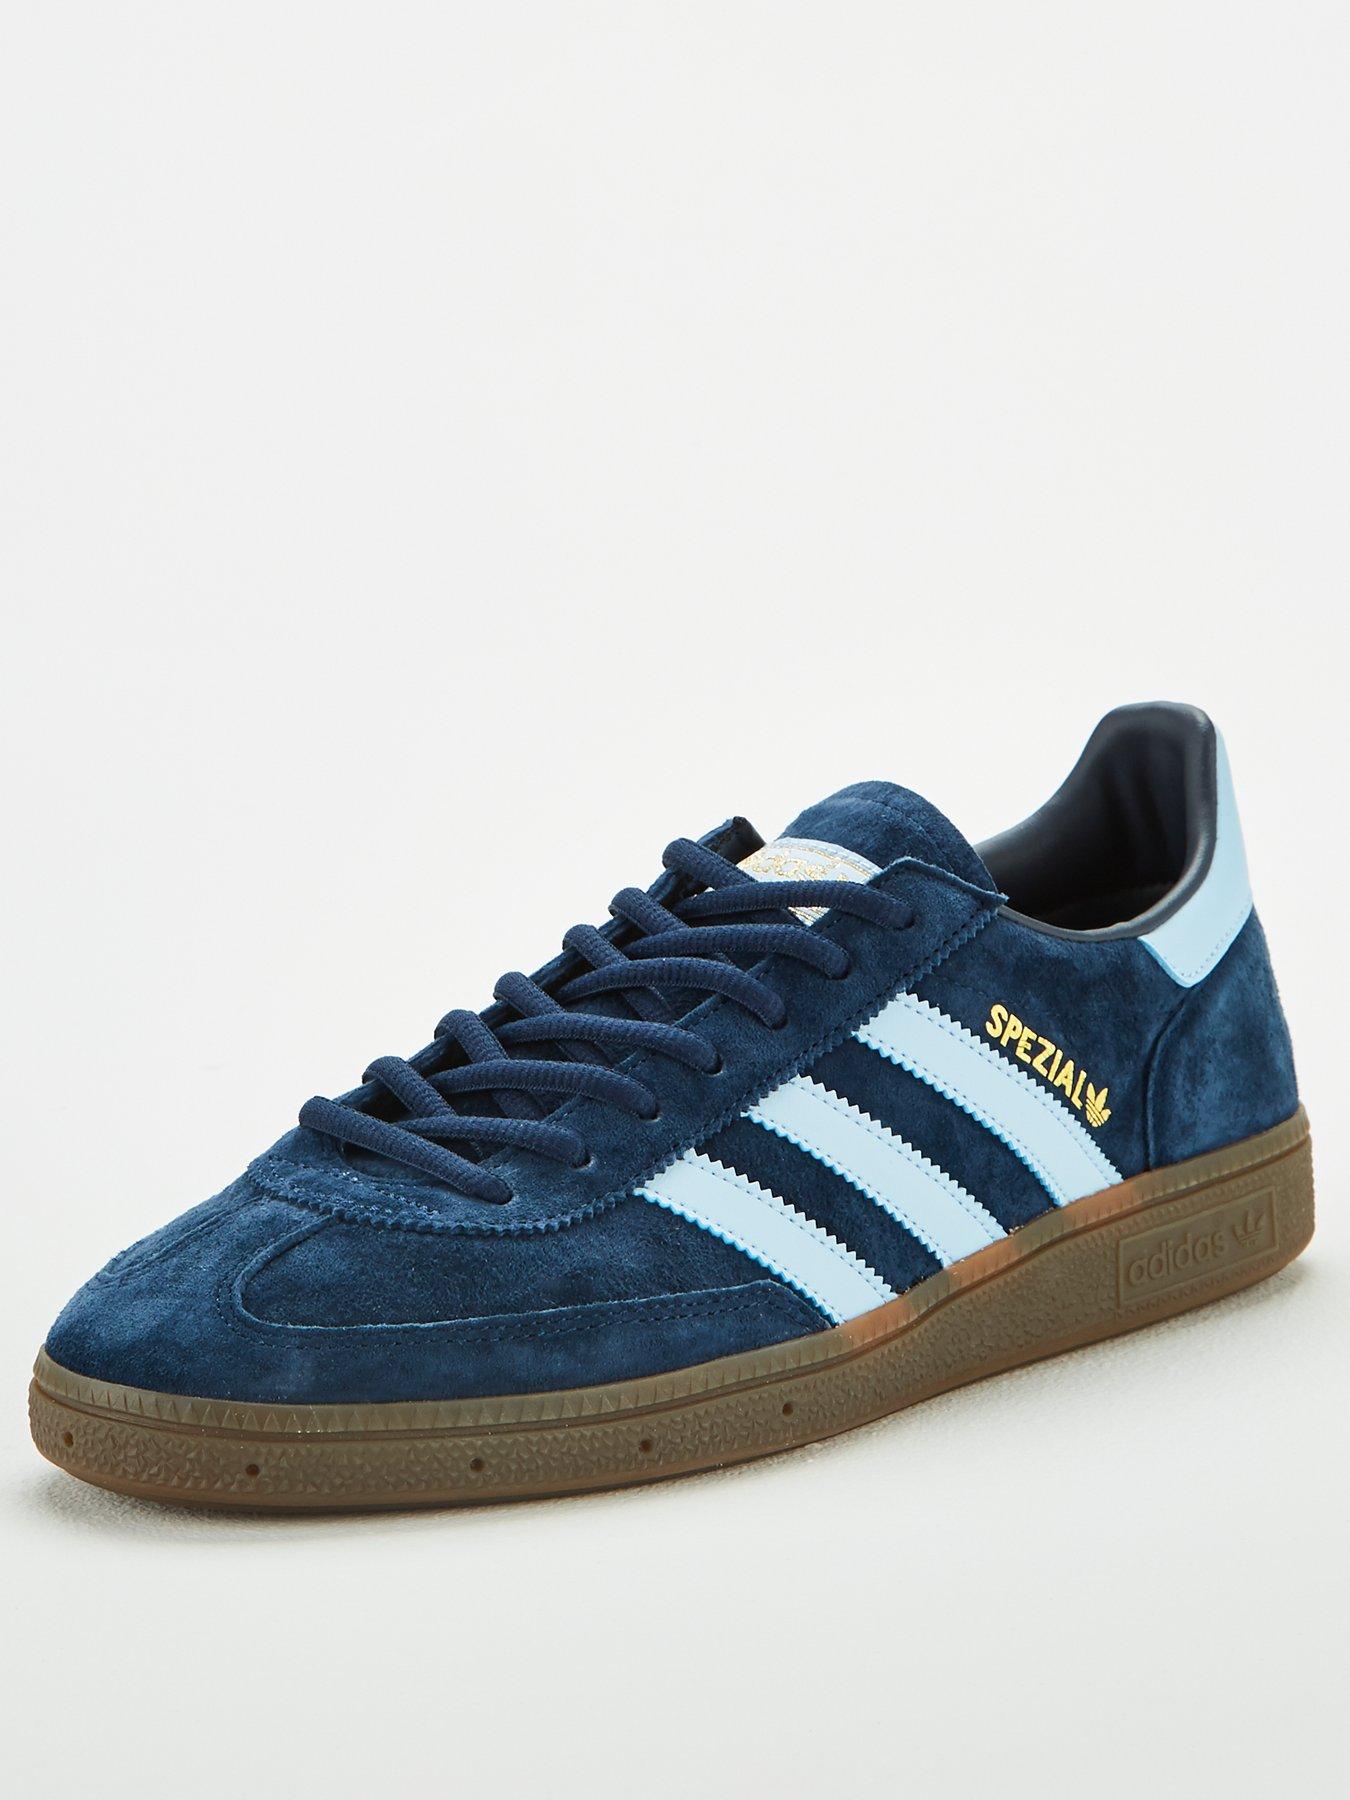 mens blue adidas trainers